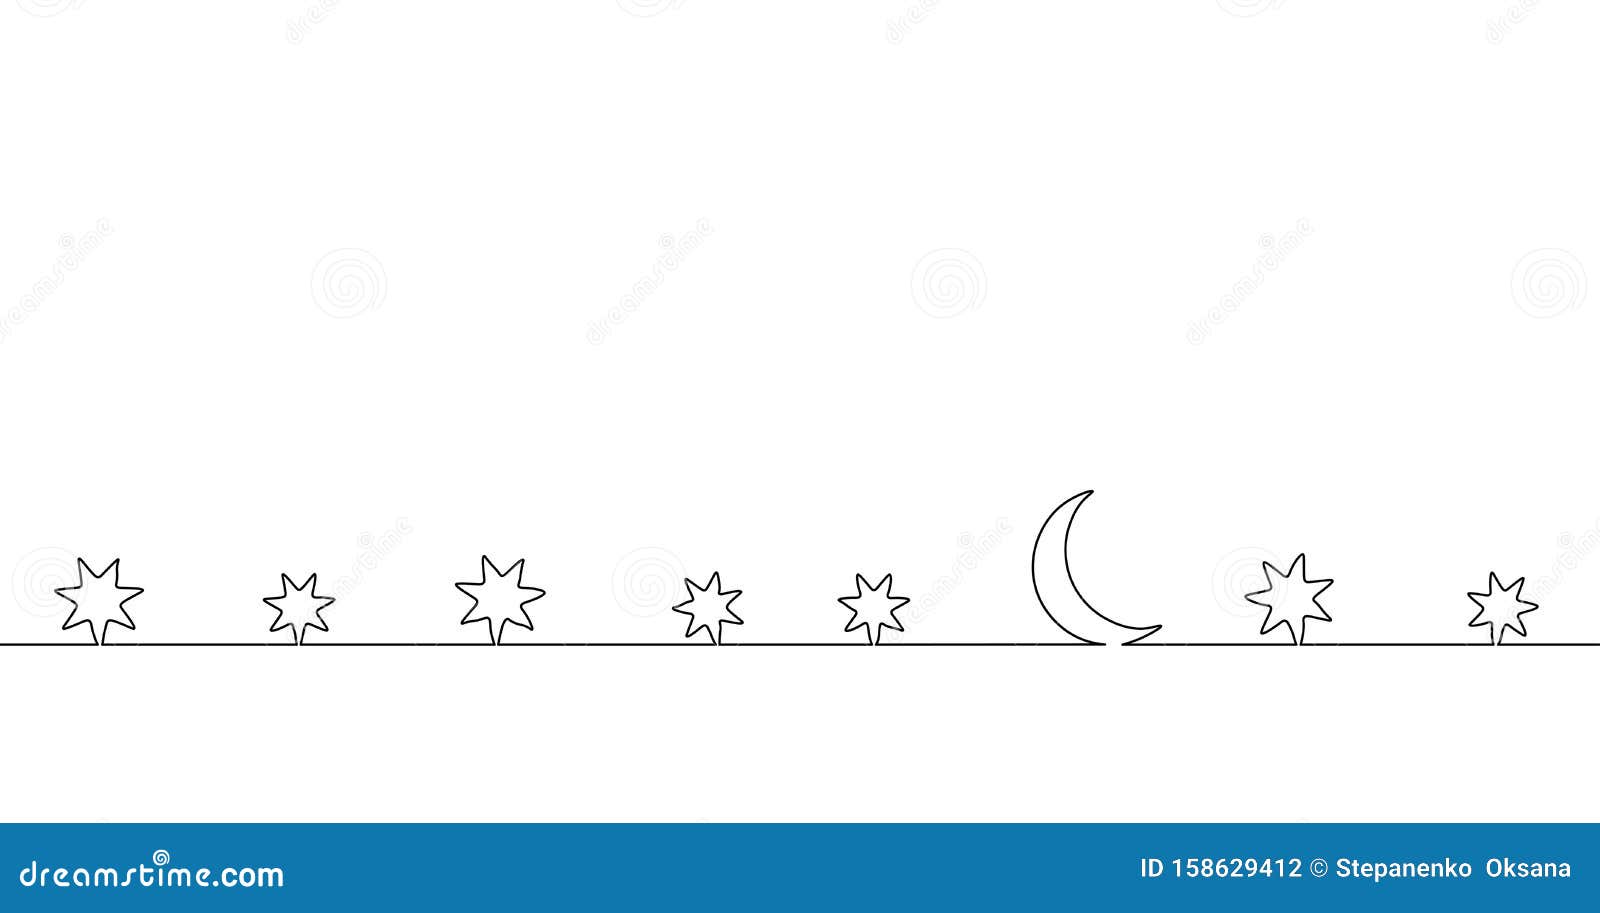 single continuous one line art moon night. sleep wall stars sky concept  sketch. relax recreation starry evening